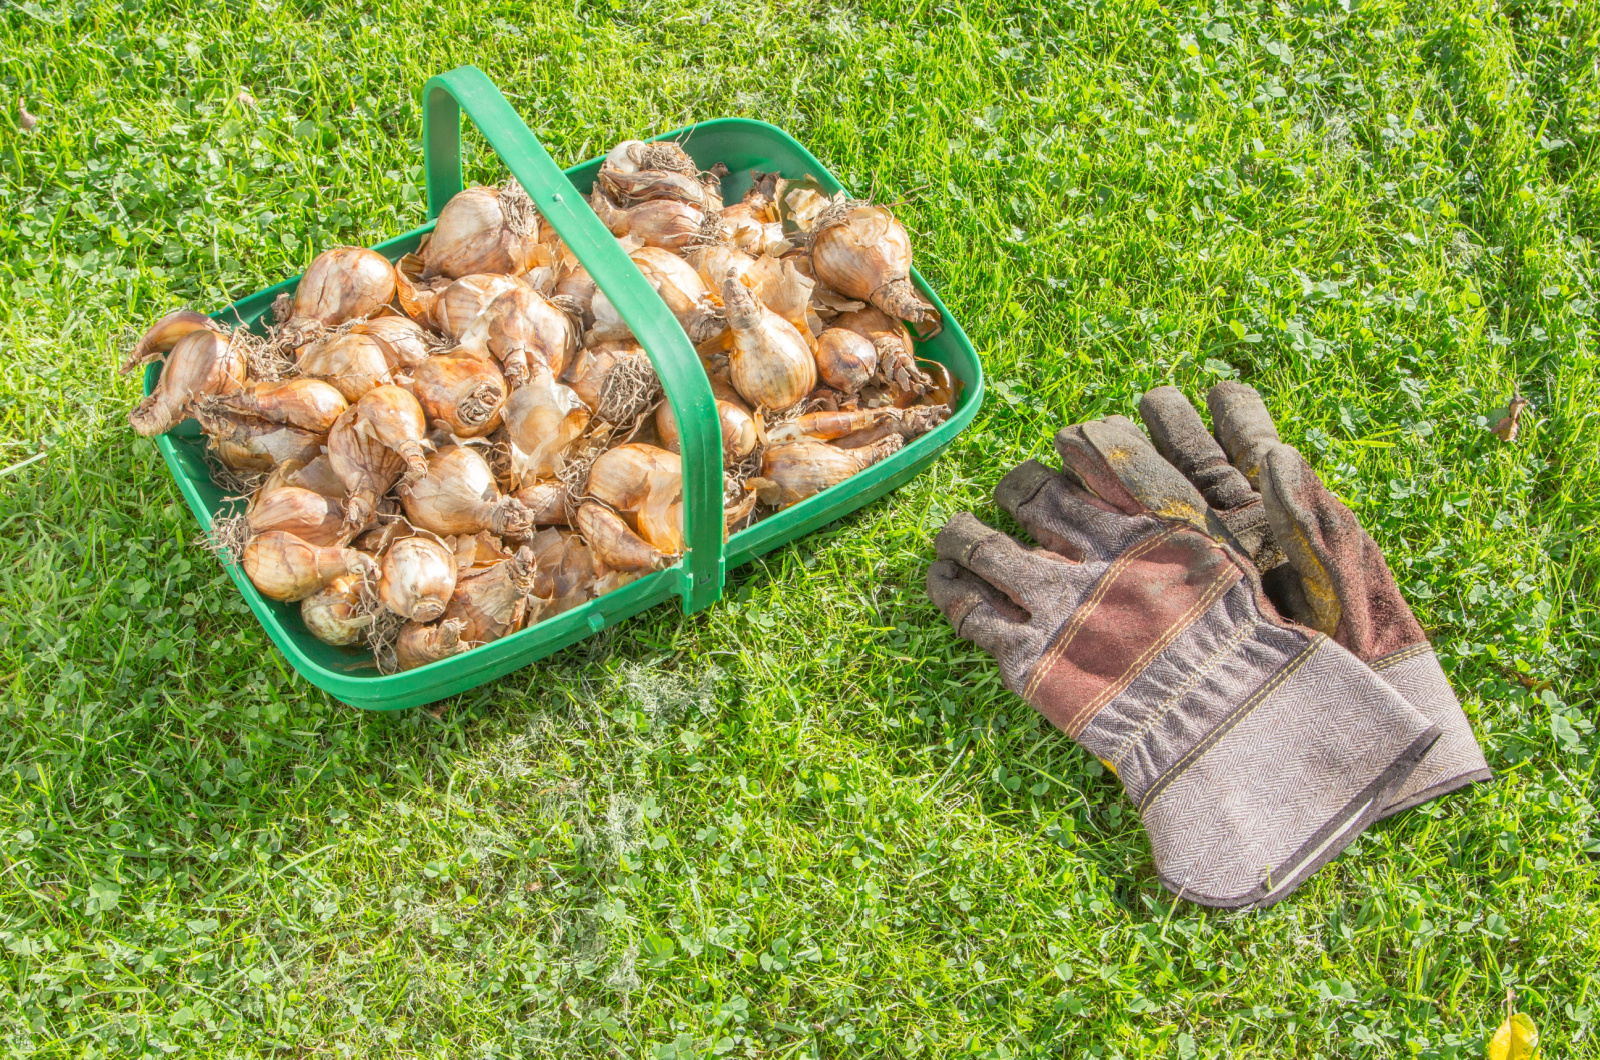 bulbs and gardening gloves